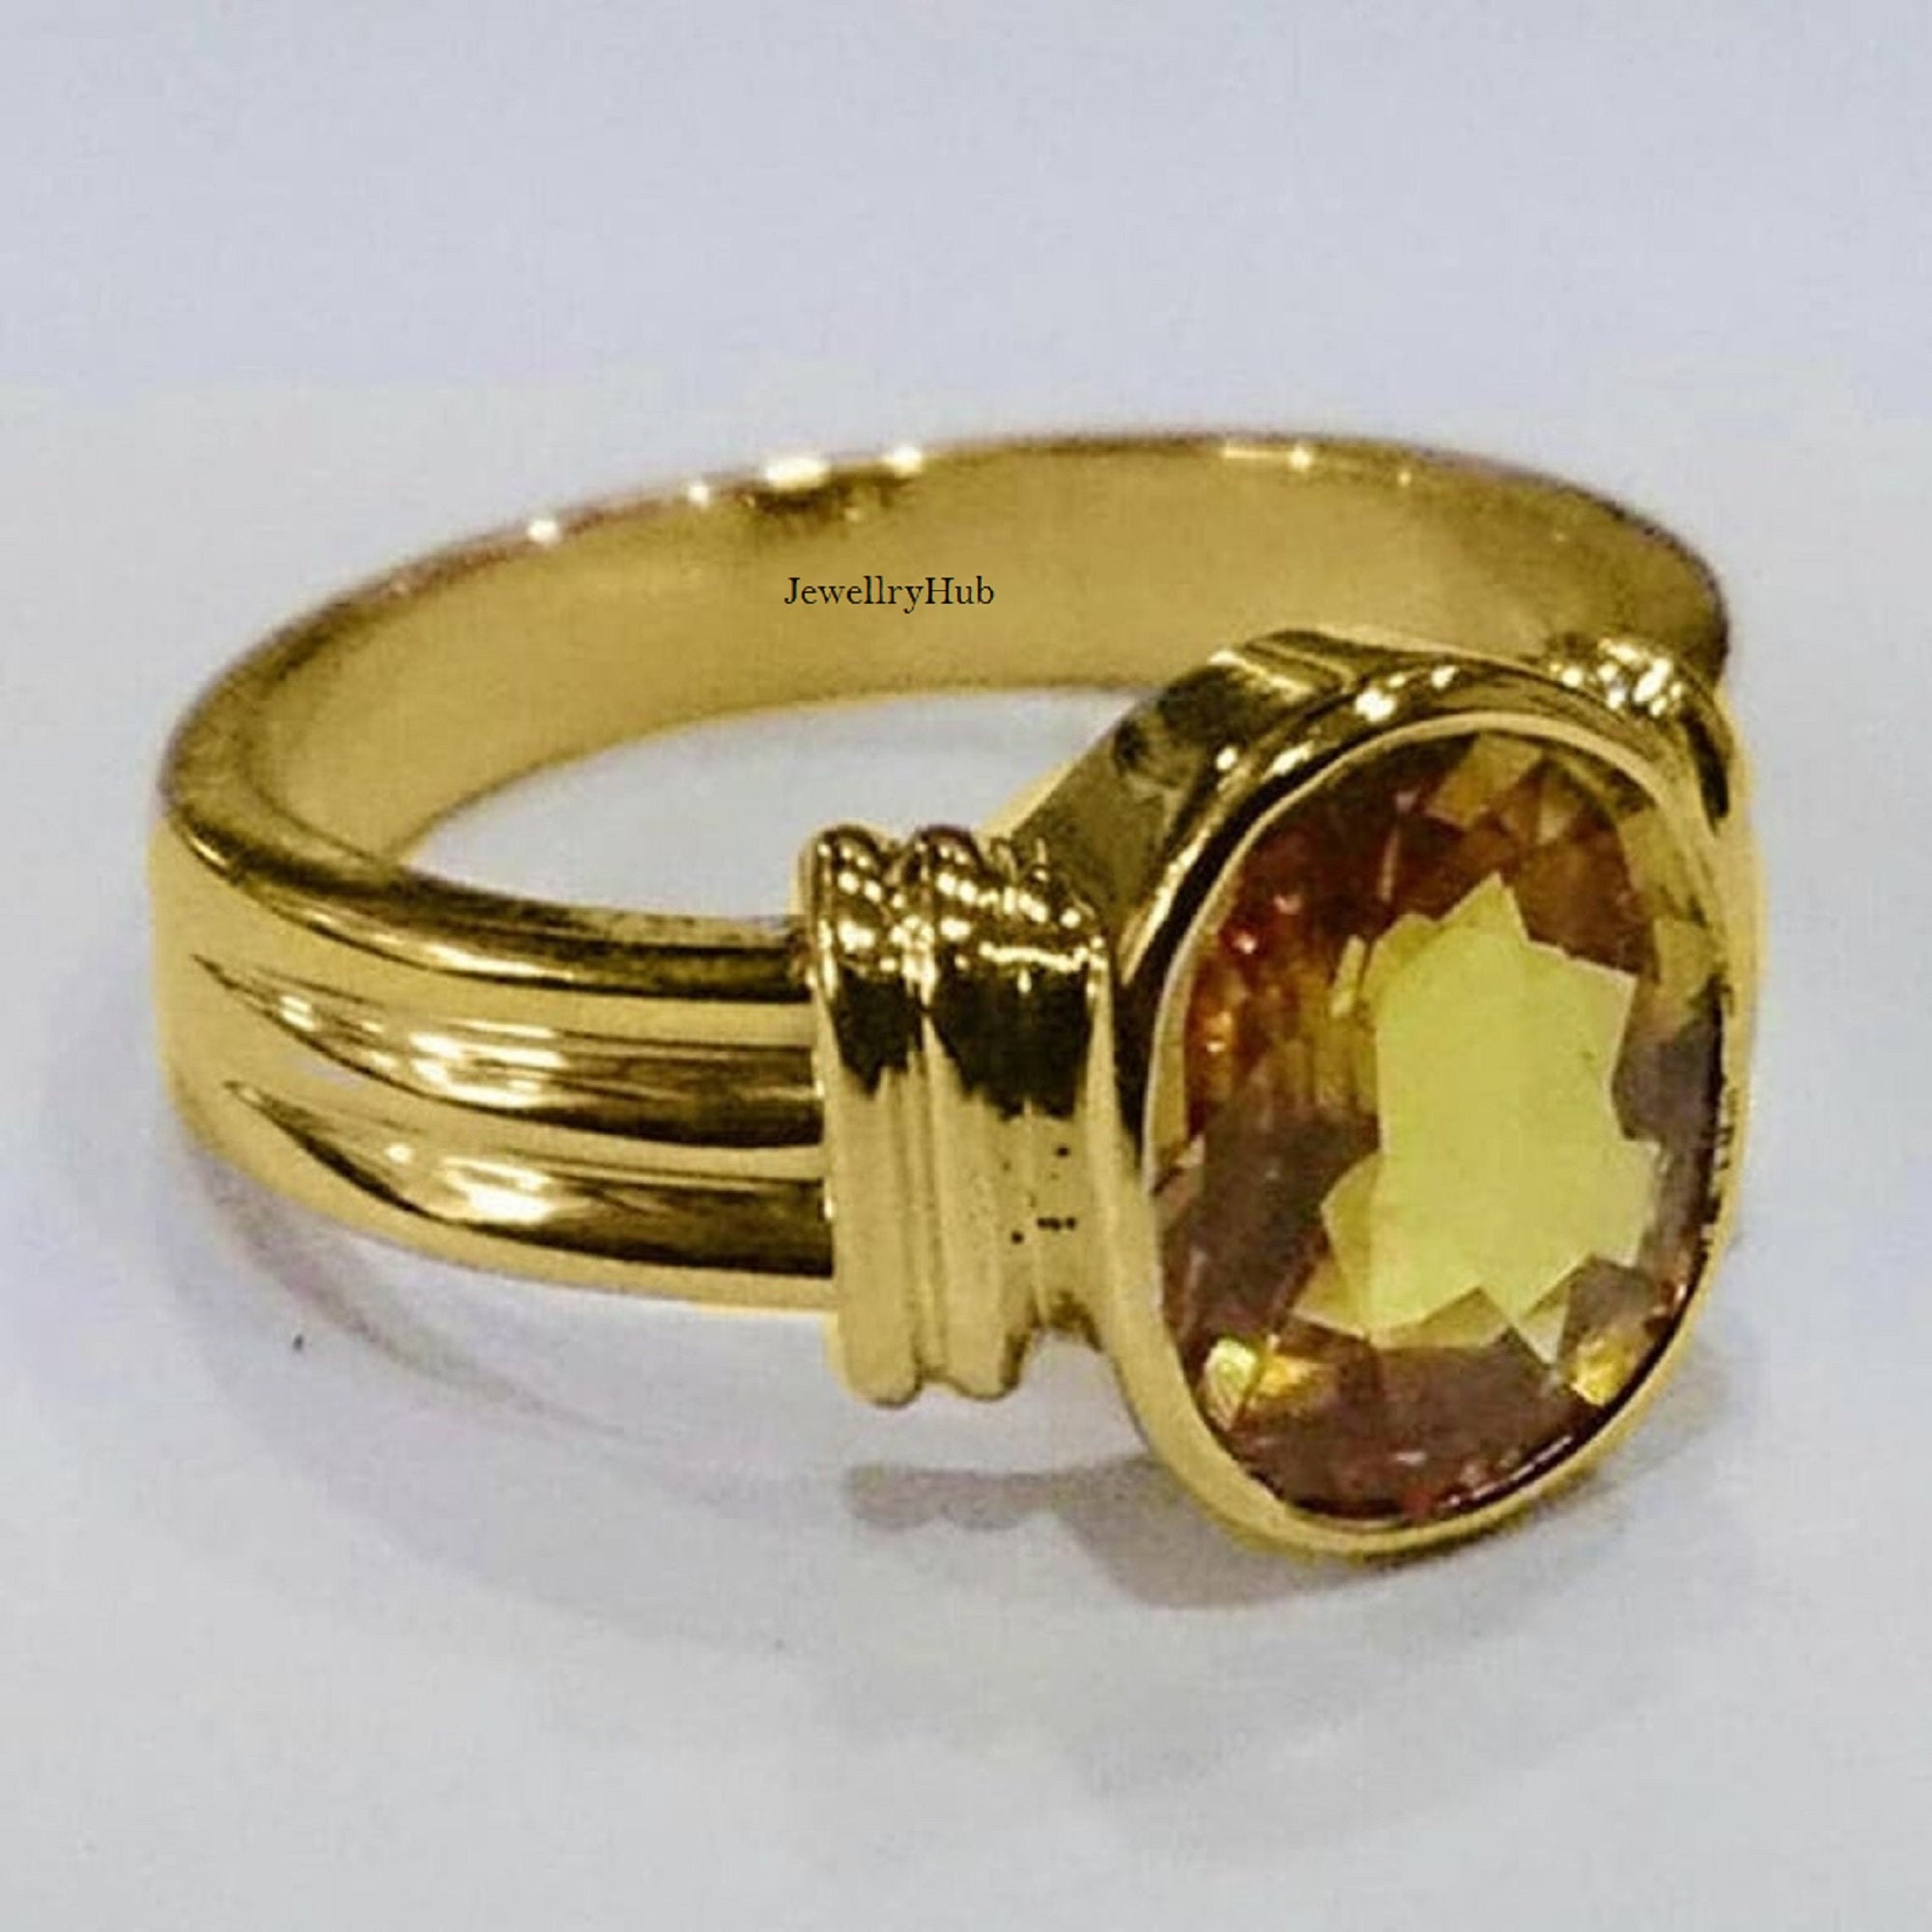 Buy Ceylonmine Yellow Sapphire Pukhraj Ring Stone Sapphire Copper Plated  Ring Online at Best Prices in India - JioMart.